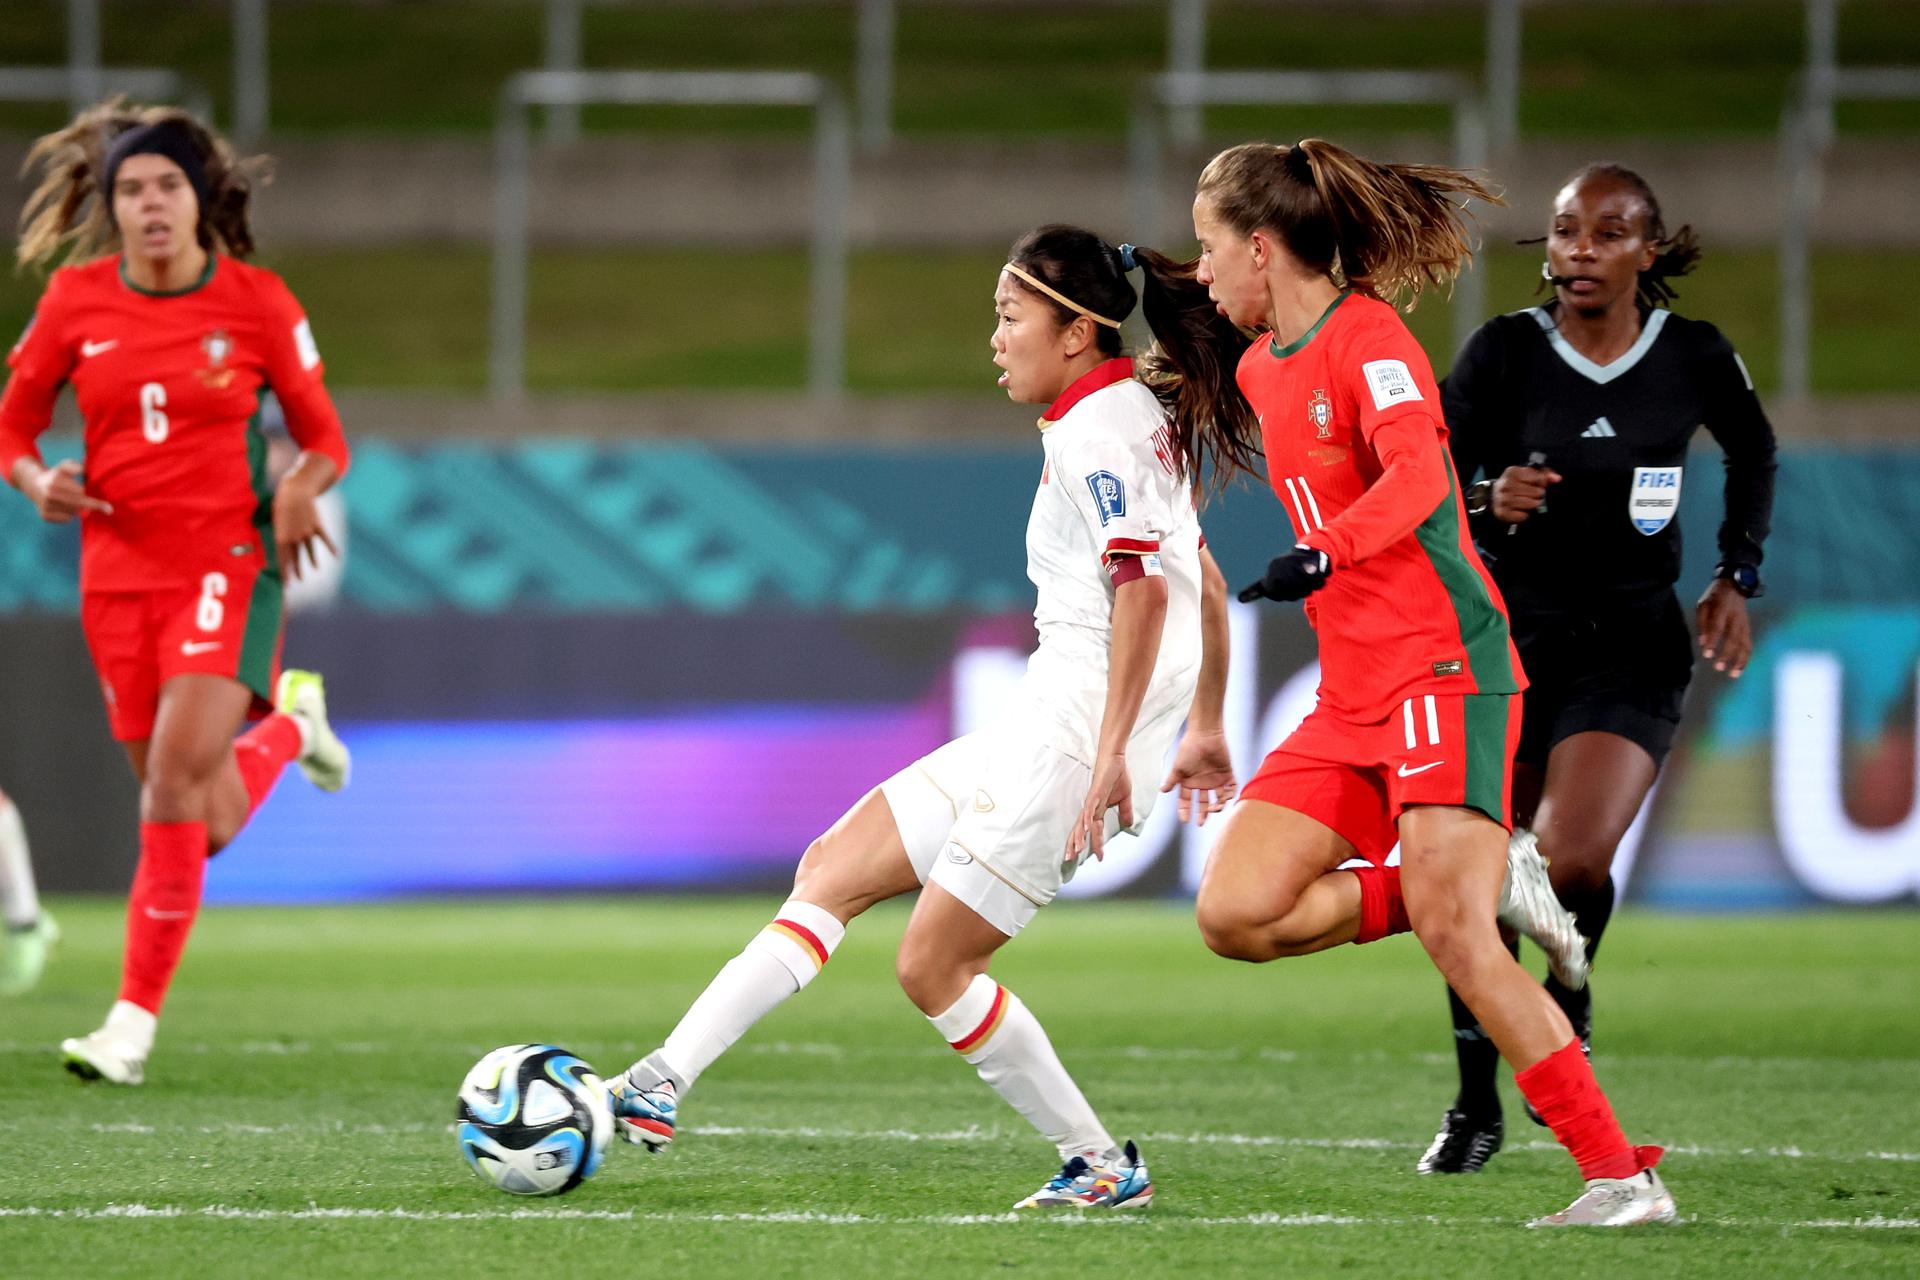 Vietnam's Huynh Nhu (L) and Tatiana Pinto of Portugal in action during the FIFA Women's World Cup Group E match in Hamilton, New Zealand. EFE/EPA/HOW HWEE YOUNG
